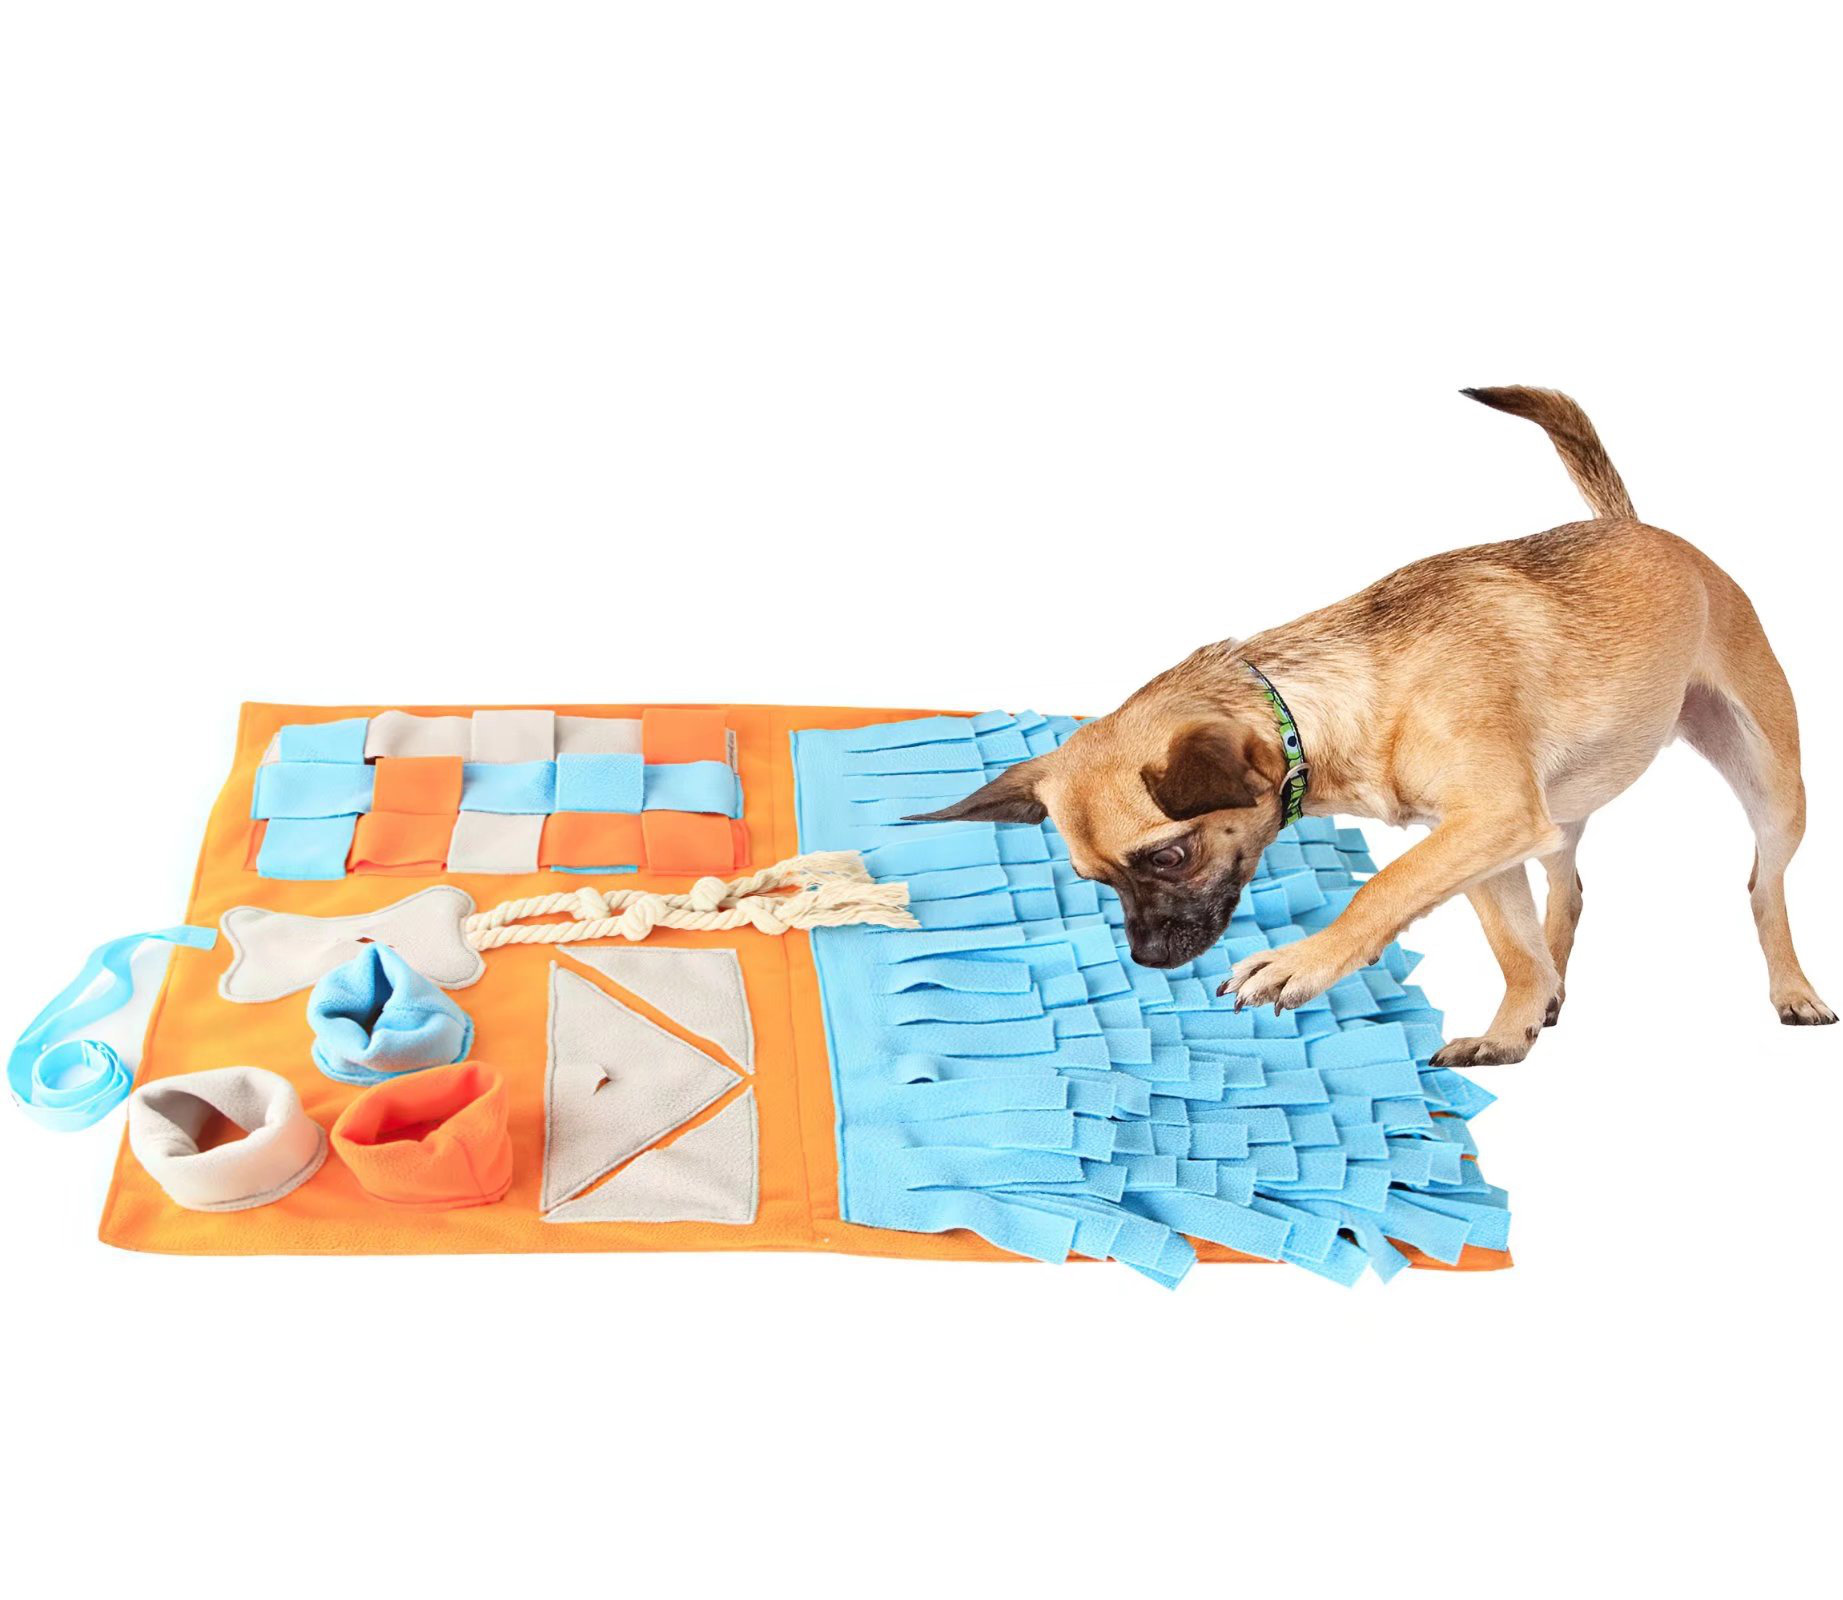 Feeding Mat Puzzle, Snuffle Mat for Large Medium Small Dogs, Dog Puzzle  Toys, Do